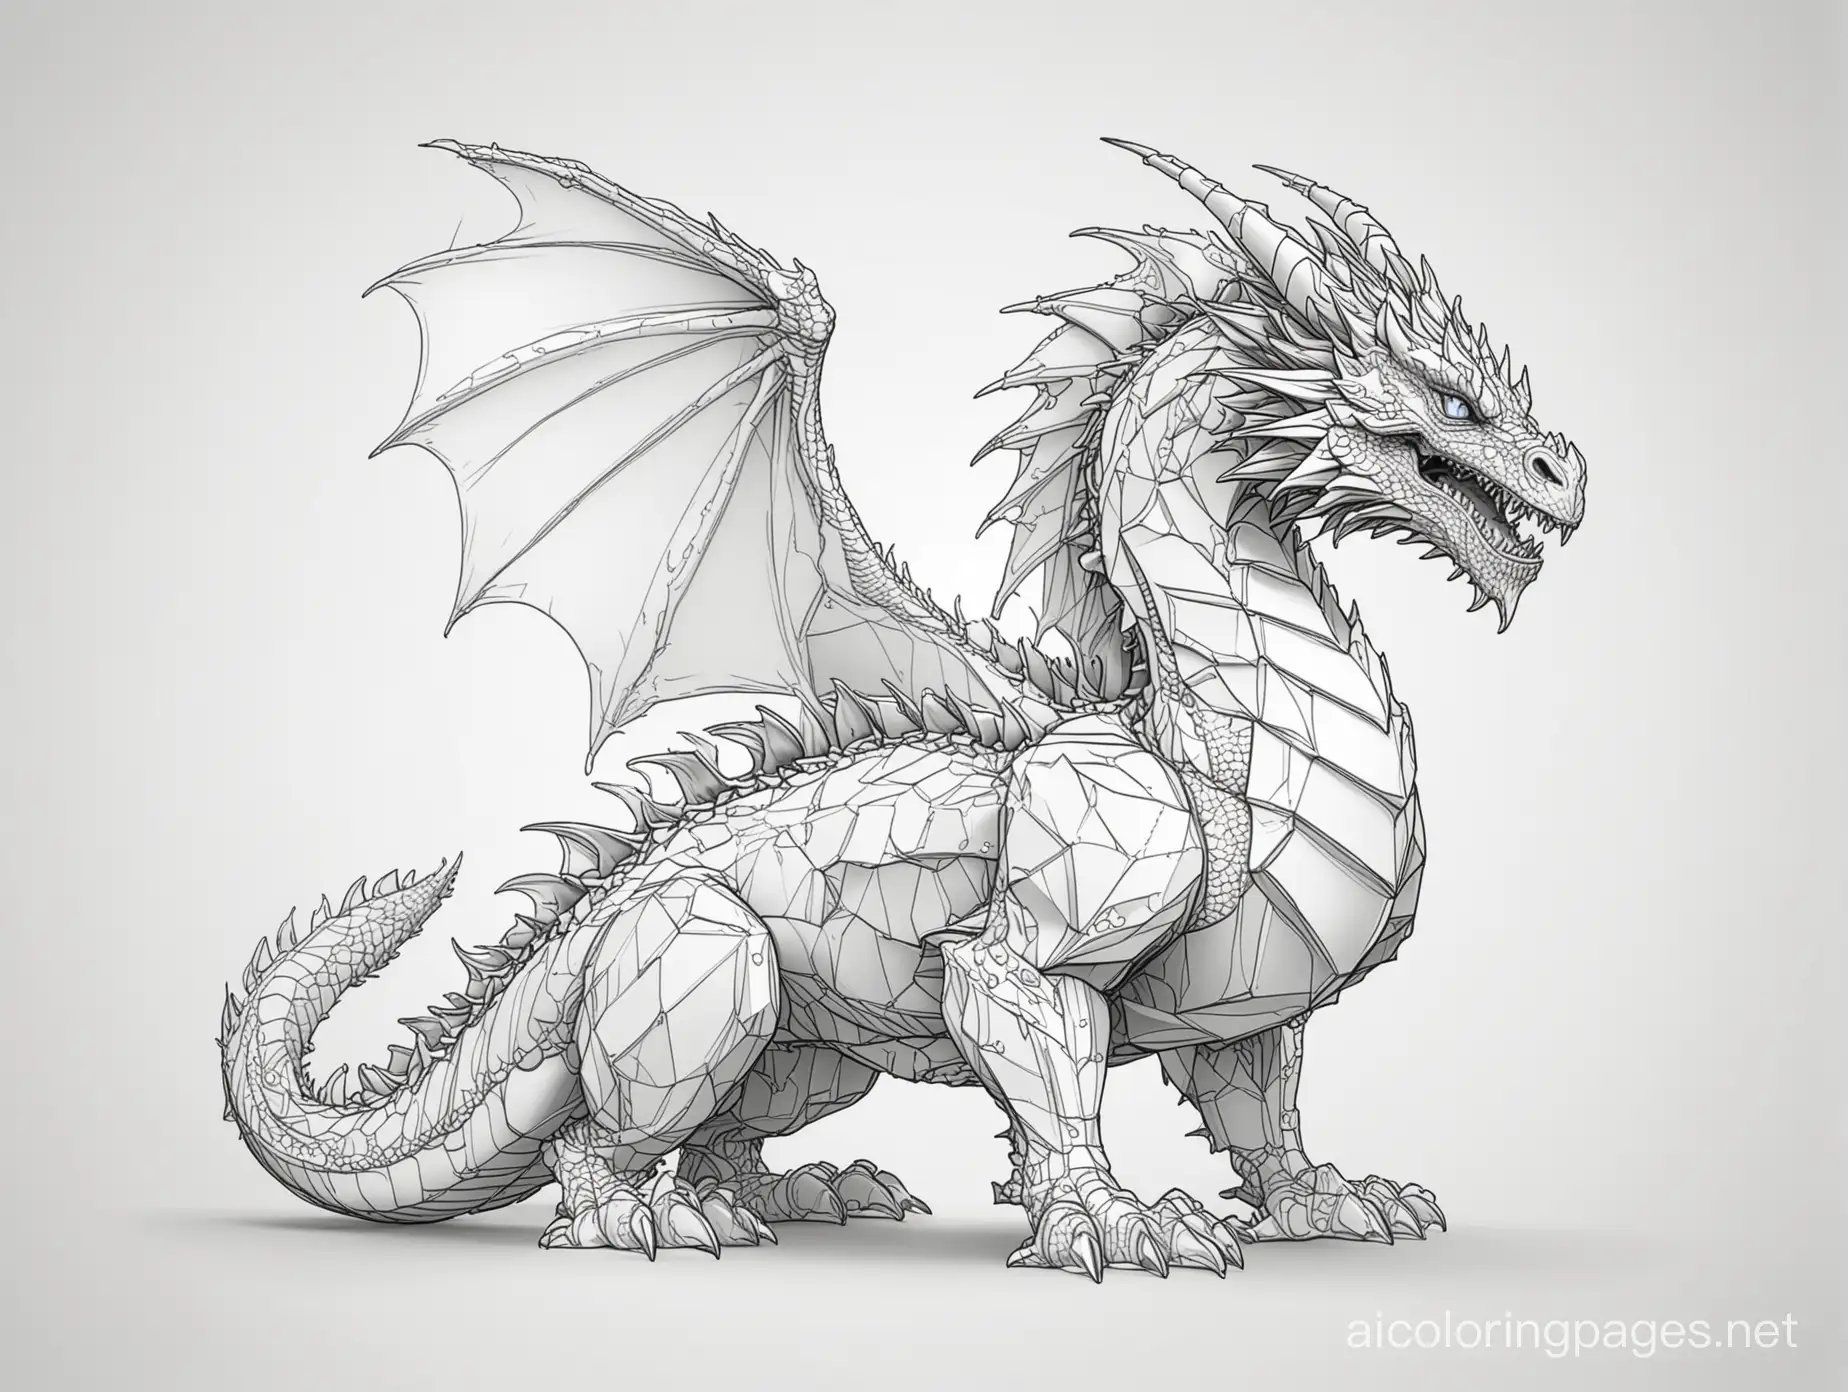 Majestic-Crystal-Titan-Dragon-Coloring-Page-Intricate-Line-Art-on-White-Background